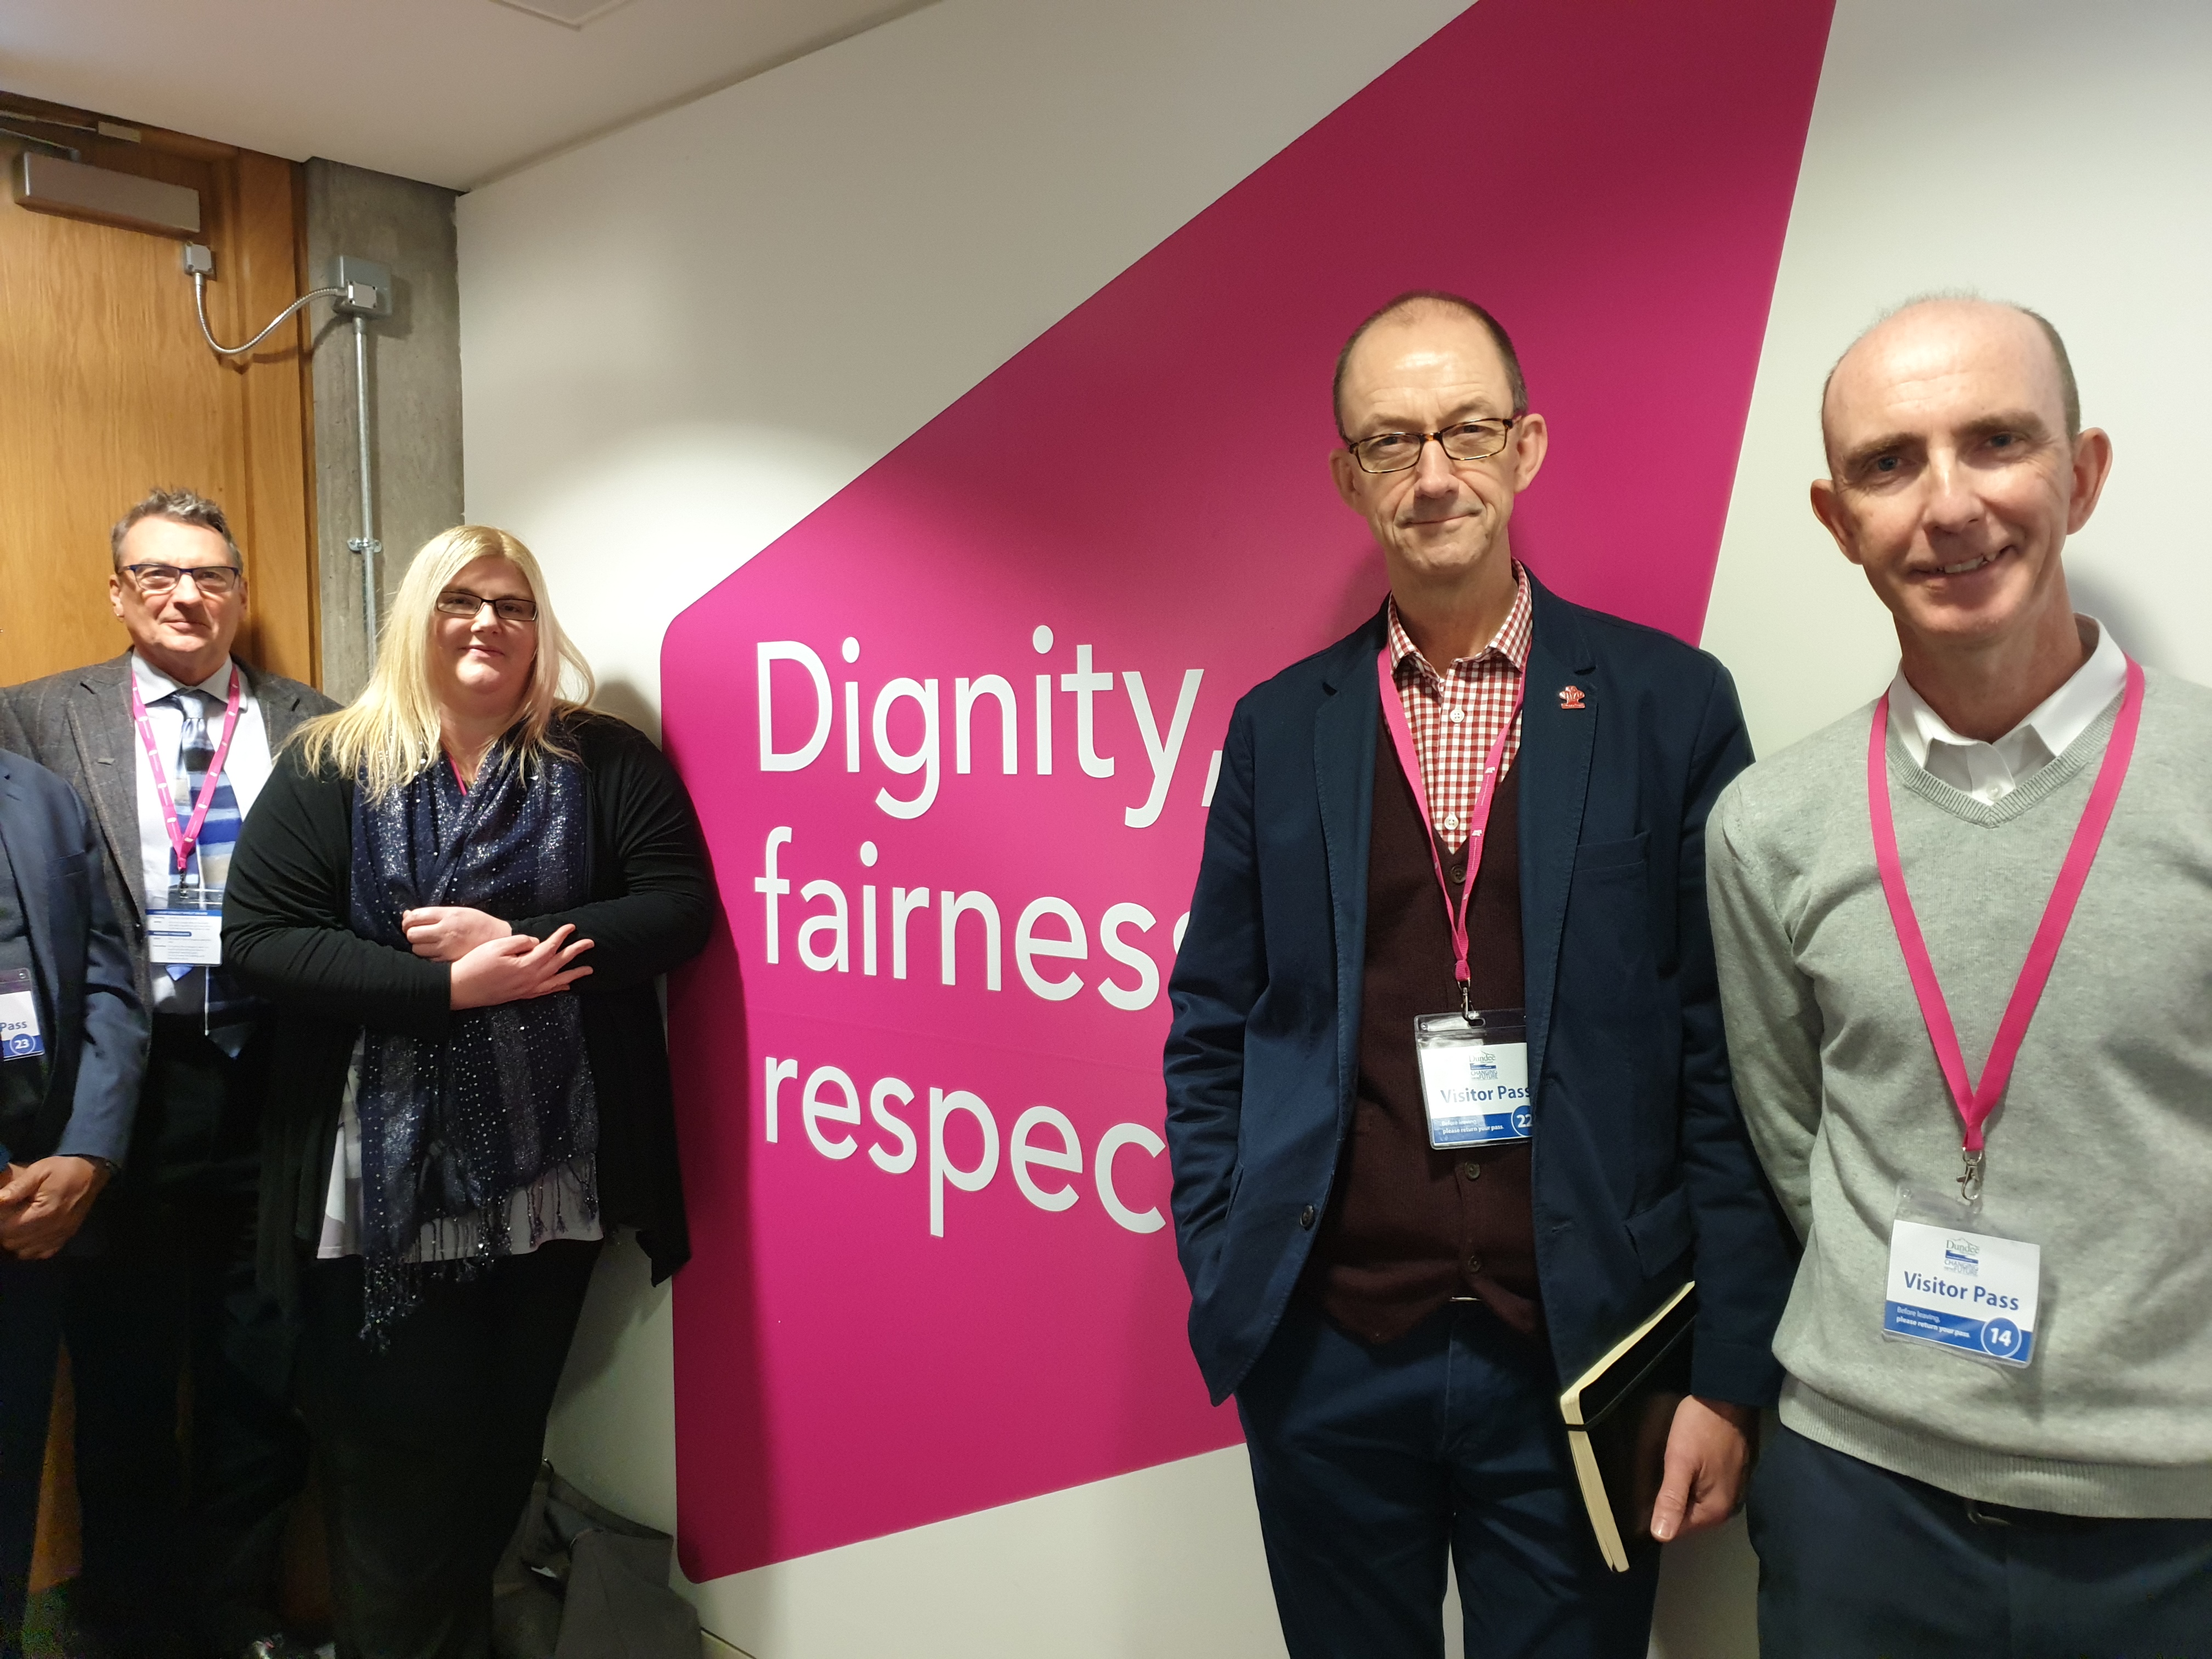 SSAC members on a visit, standing in front of sign which says Dignity, fairness, respect.